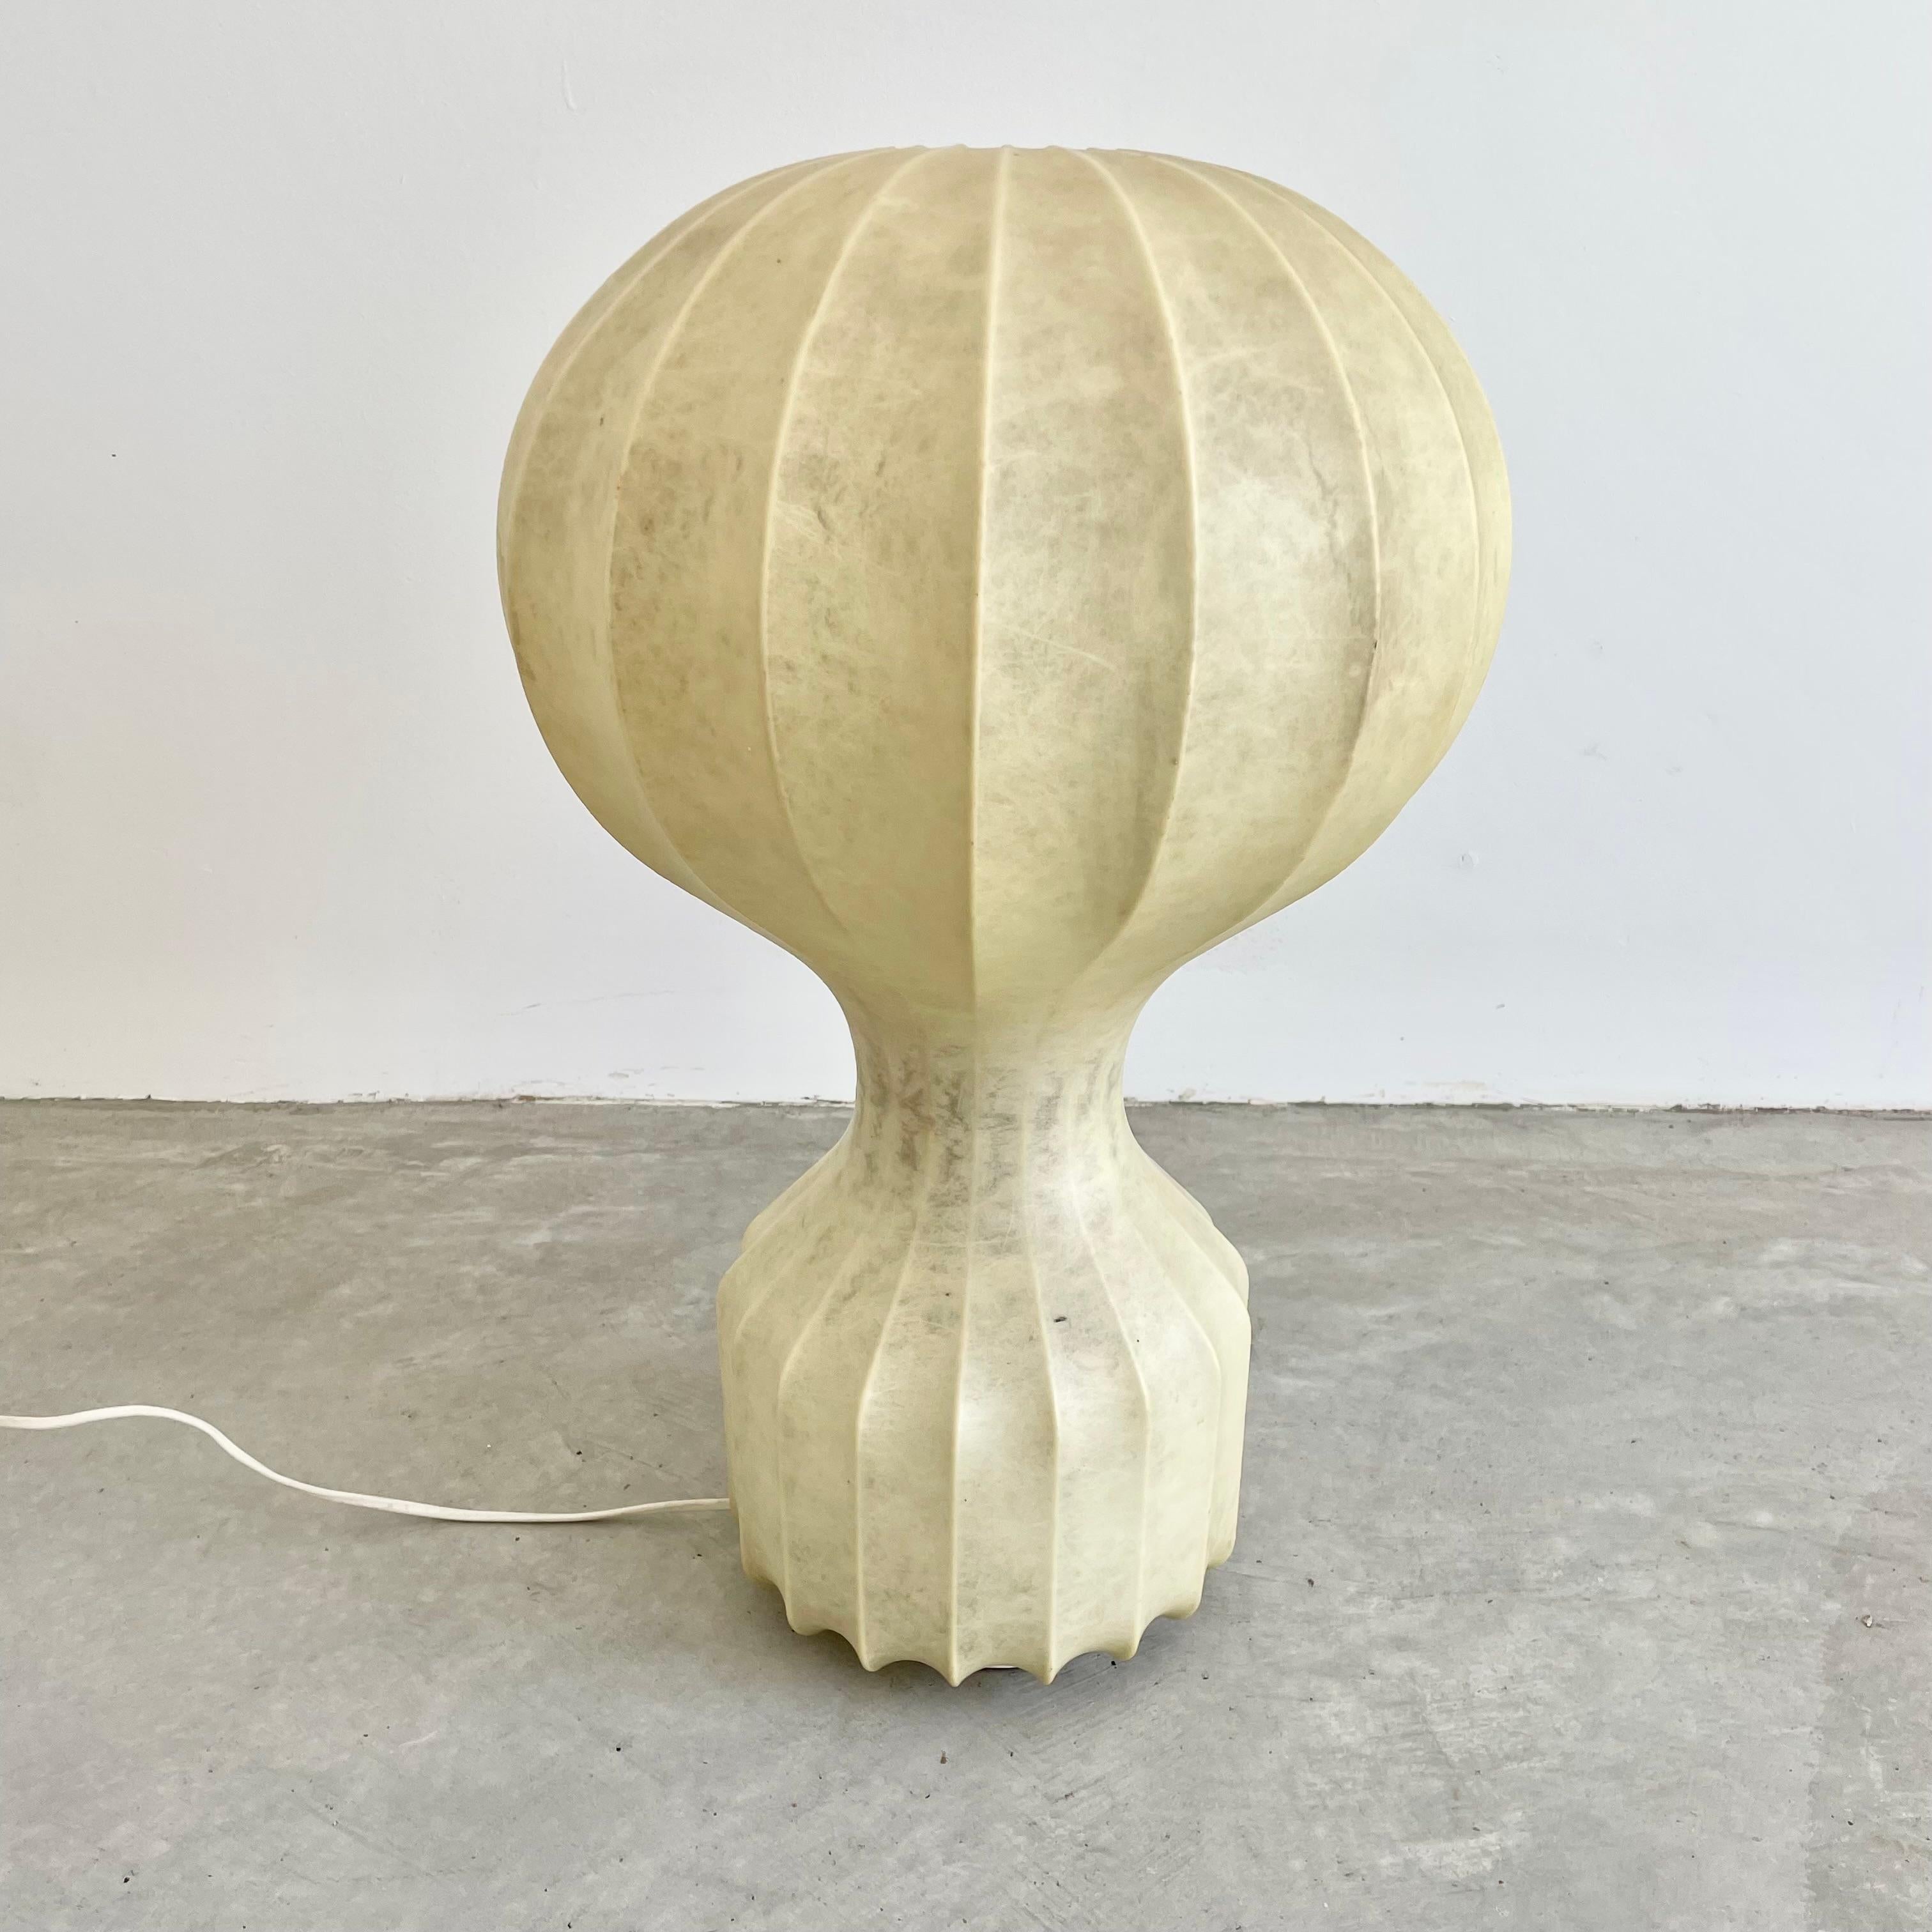 Original Italian cocoon table lamp by Achille Castiglioni for Flos. Wire frame beautifully wrapped in a fibrous paper give this piece tons of presence. Great scale and an elegant piece of collectible mid-century design. Good vintage condition.


